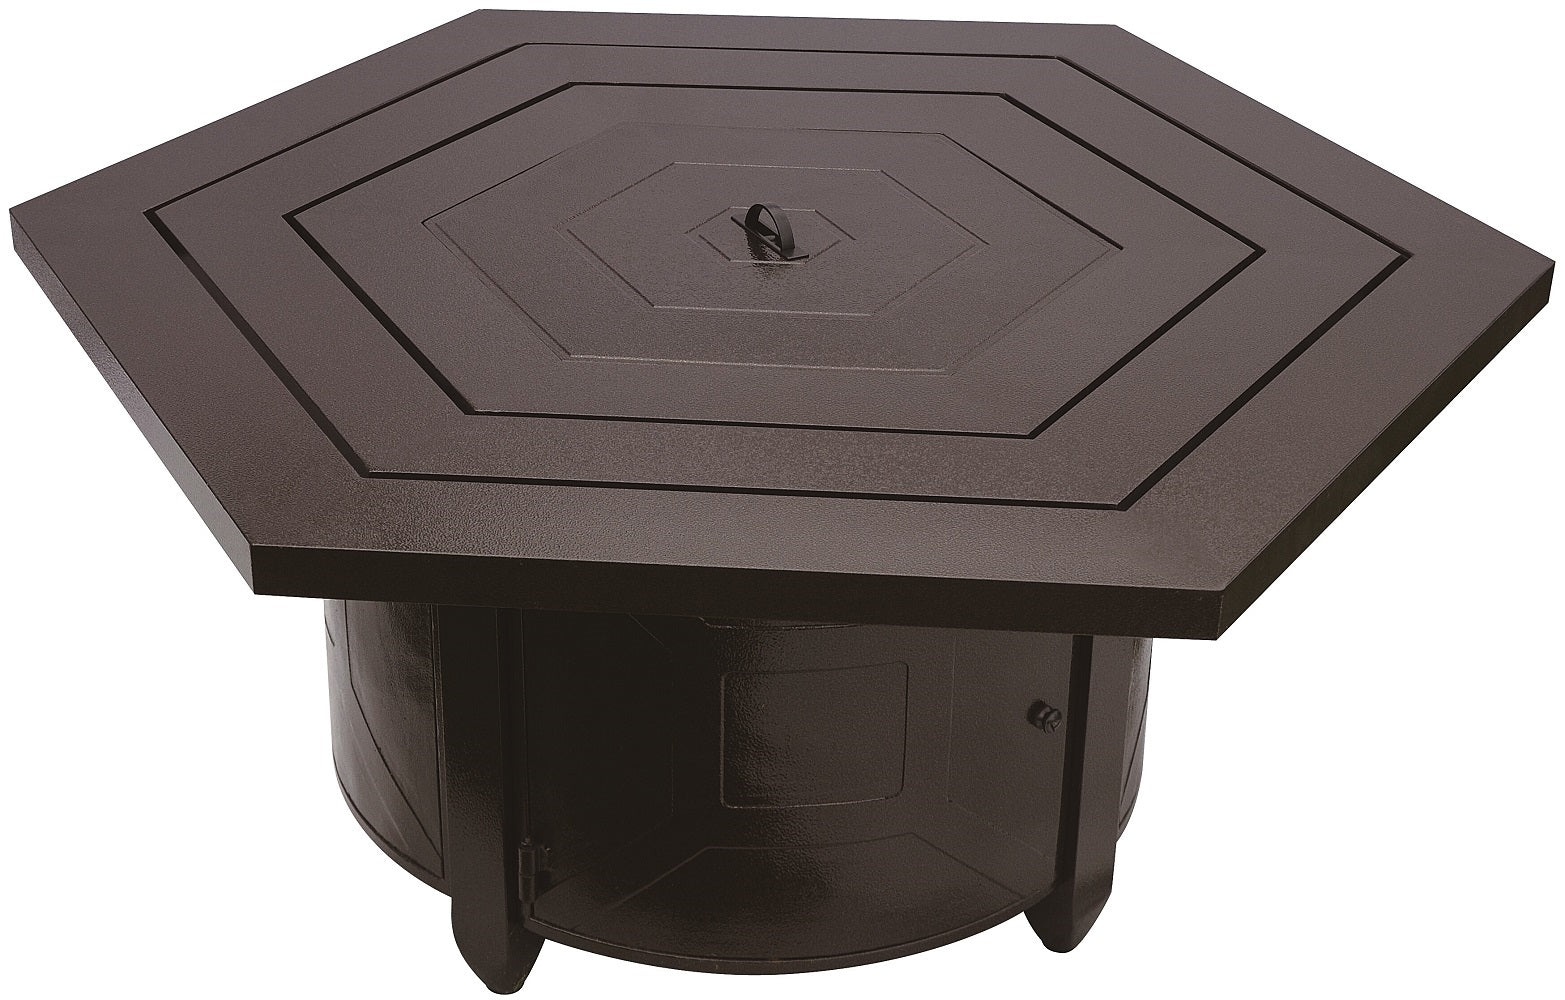 Hiland Hexagon Fire Pit -Hammered Bronze- F-HEX-FPT- Front View With Lid Close